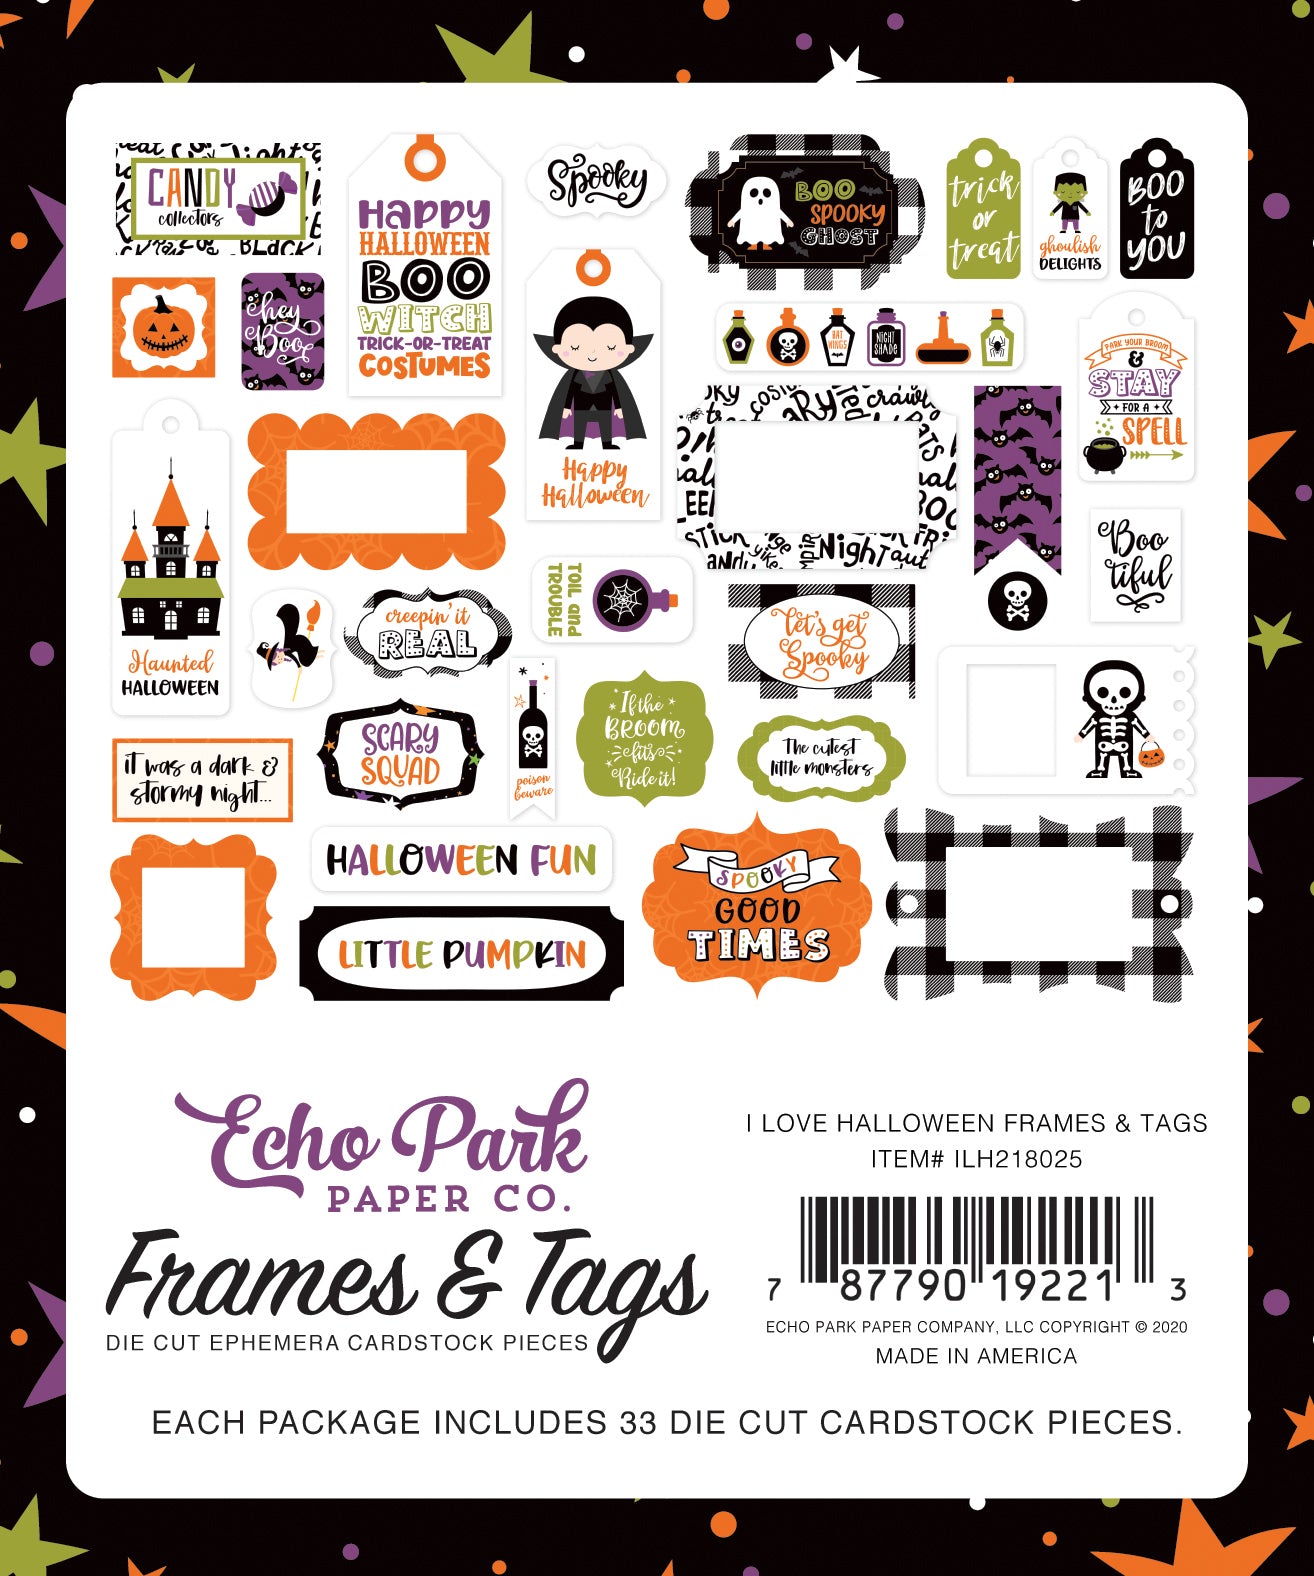 I Love Halloween Frames & Tags Die Cut Cardstock Pack.  Pack includes 33 different die-cut shapes ready to embellish any project.